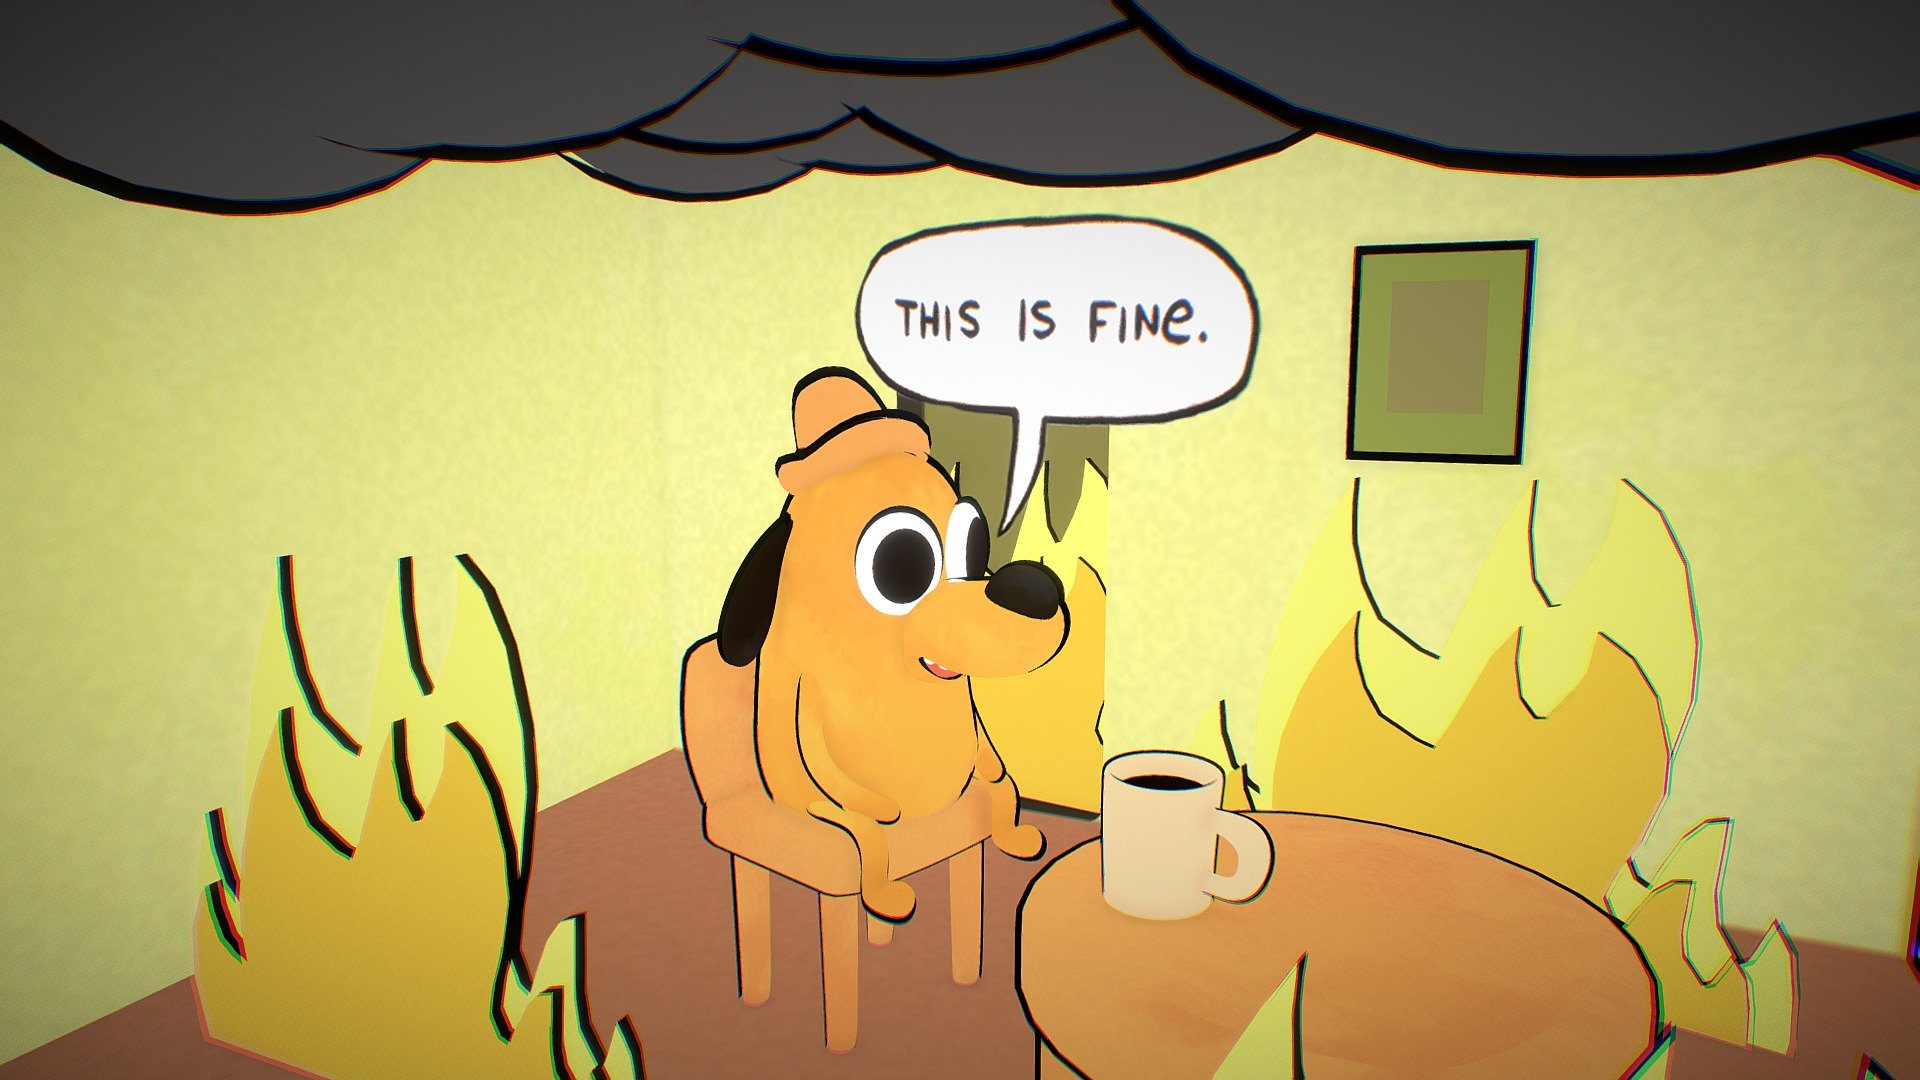 - Meme Challenge: This Is Fine - 3D model by Slo-mo Witch (@SloMoWitch) .